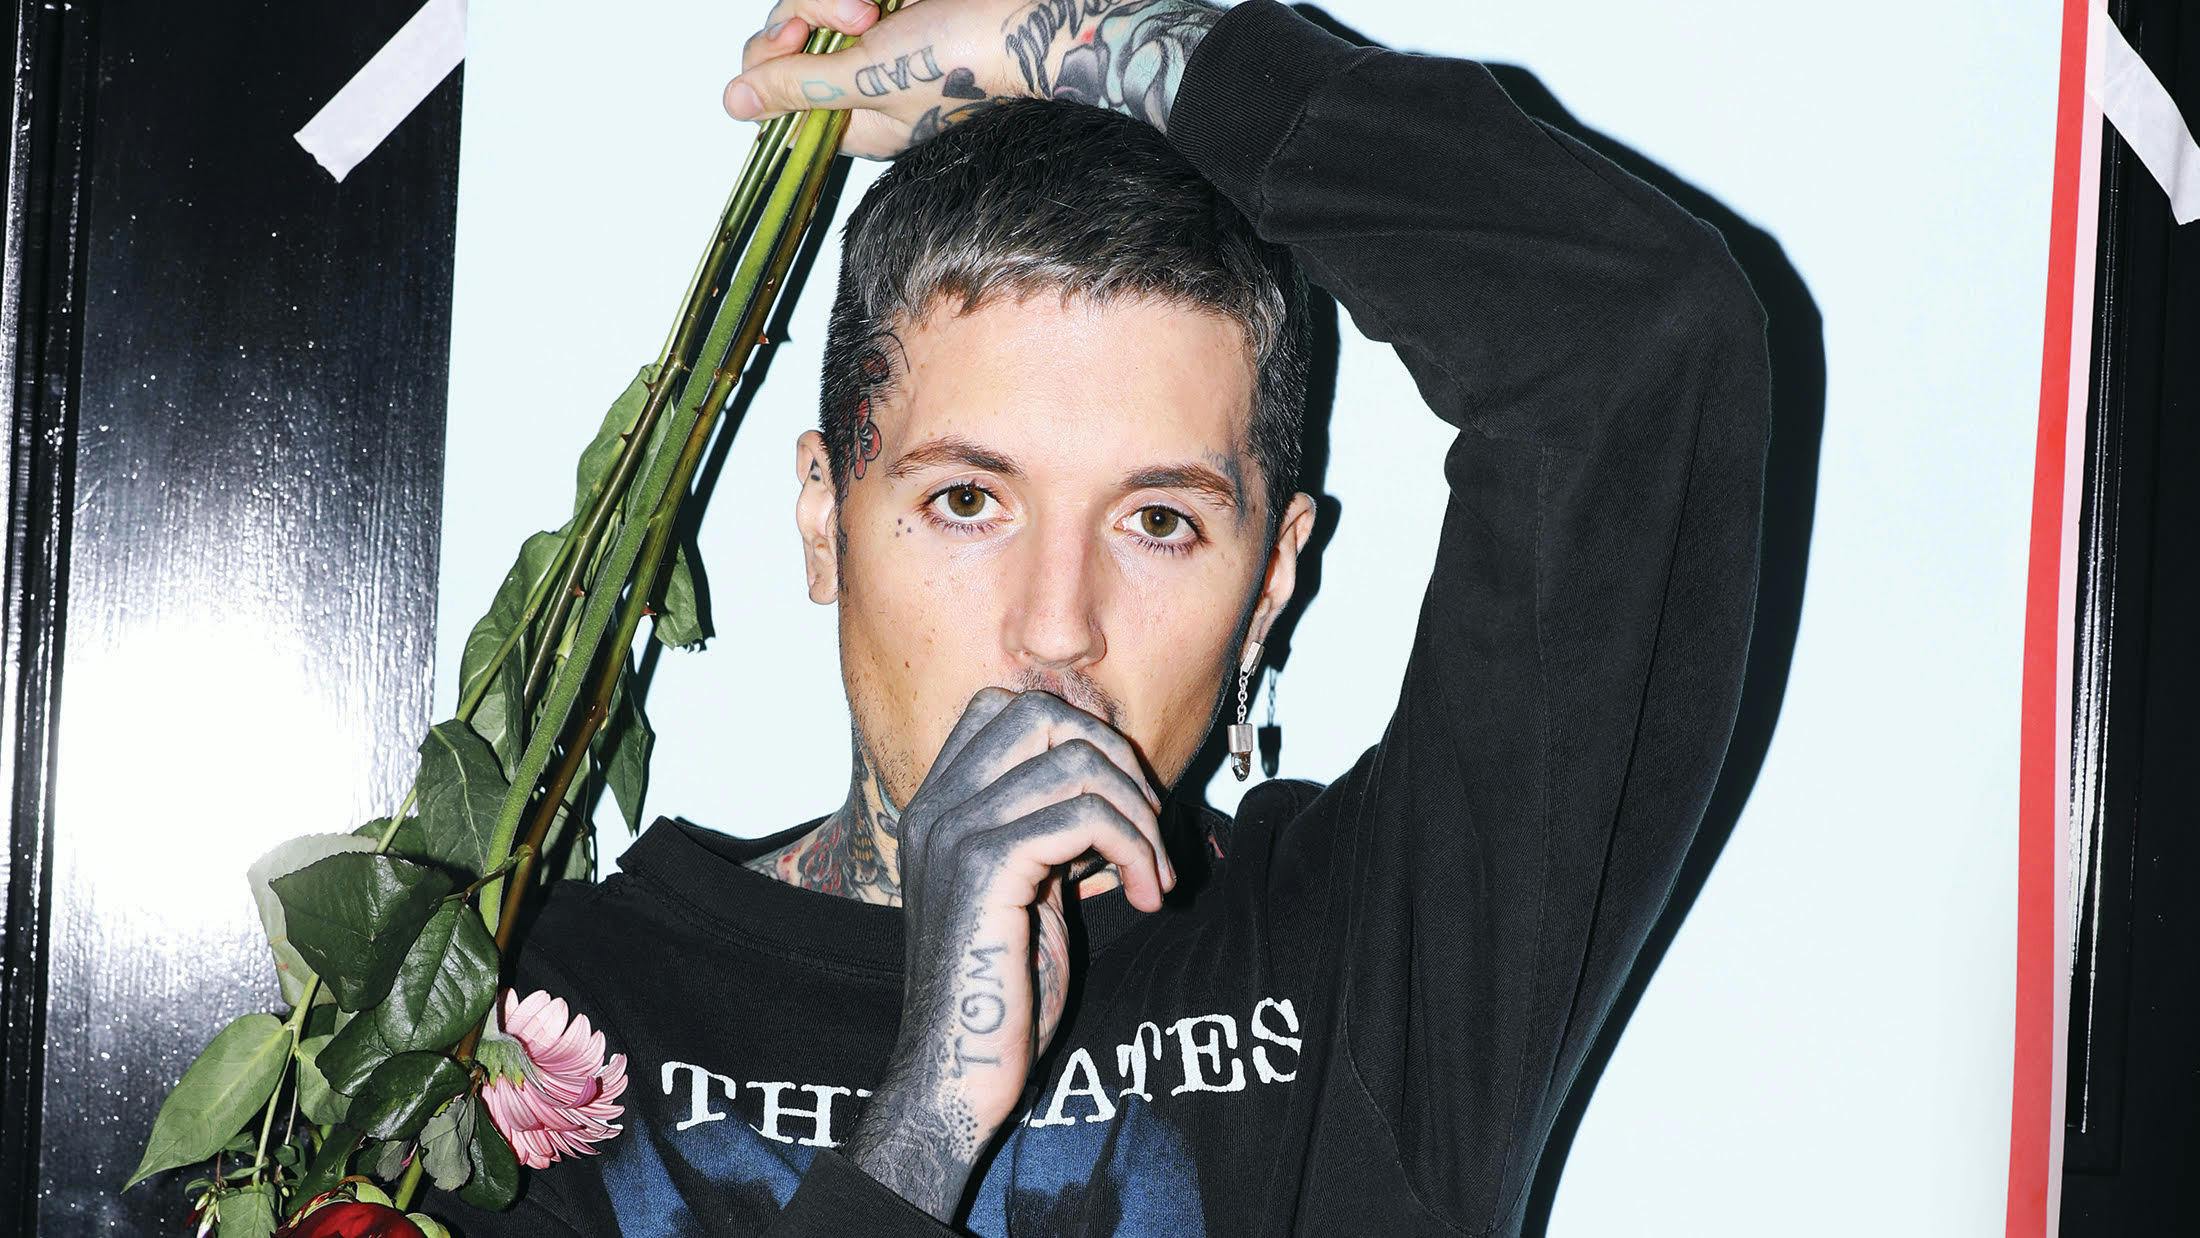 Bring Me The Horizon's Oli Sykes: "We Need To Teach People About Compassion"